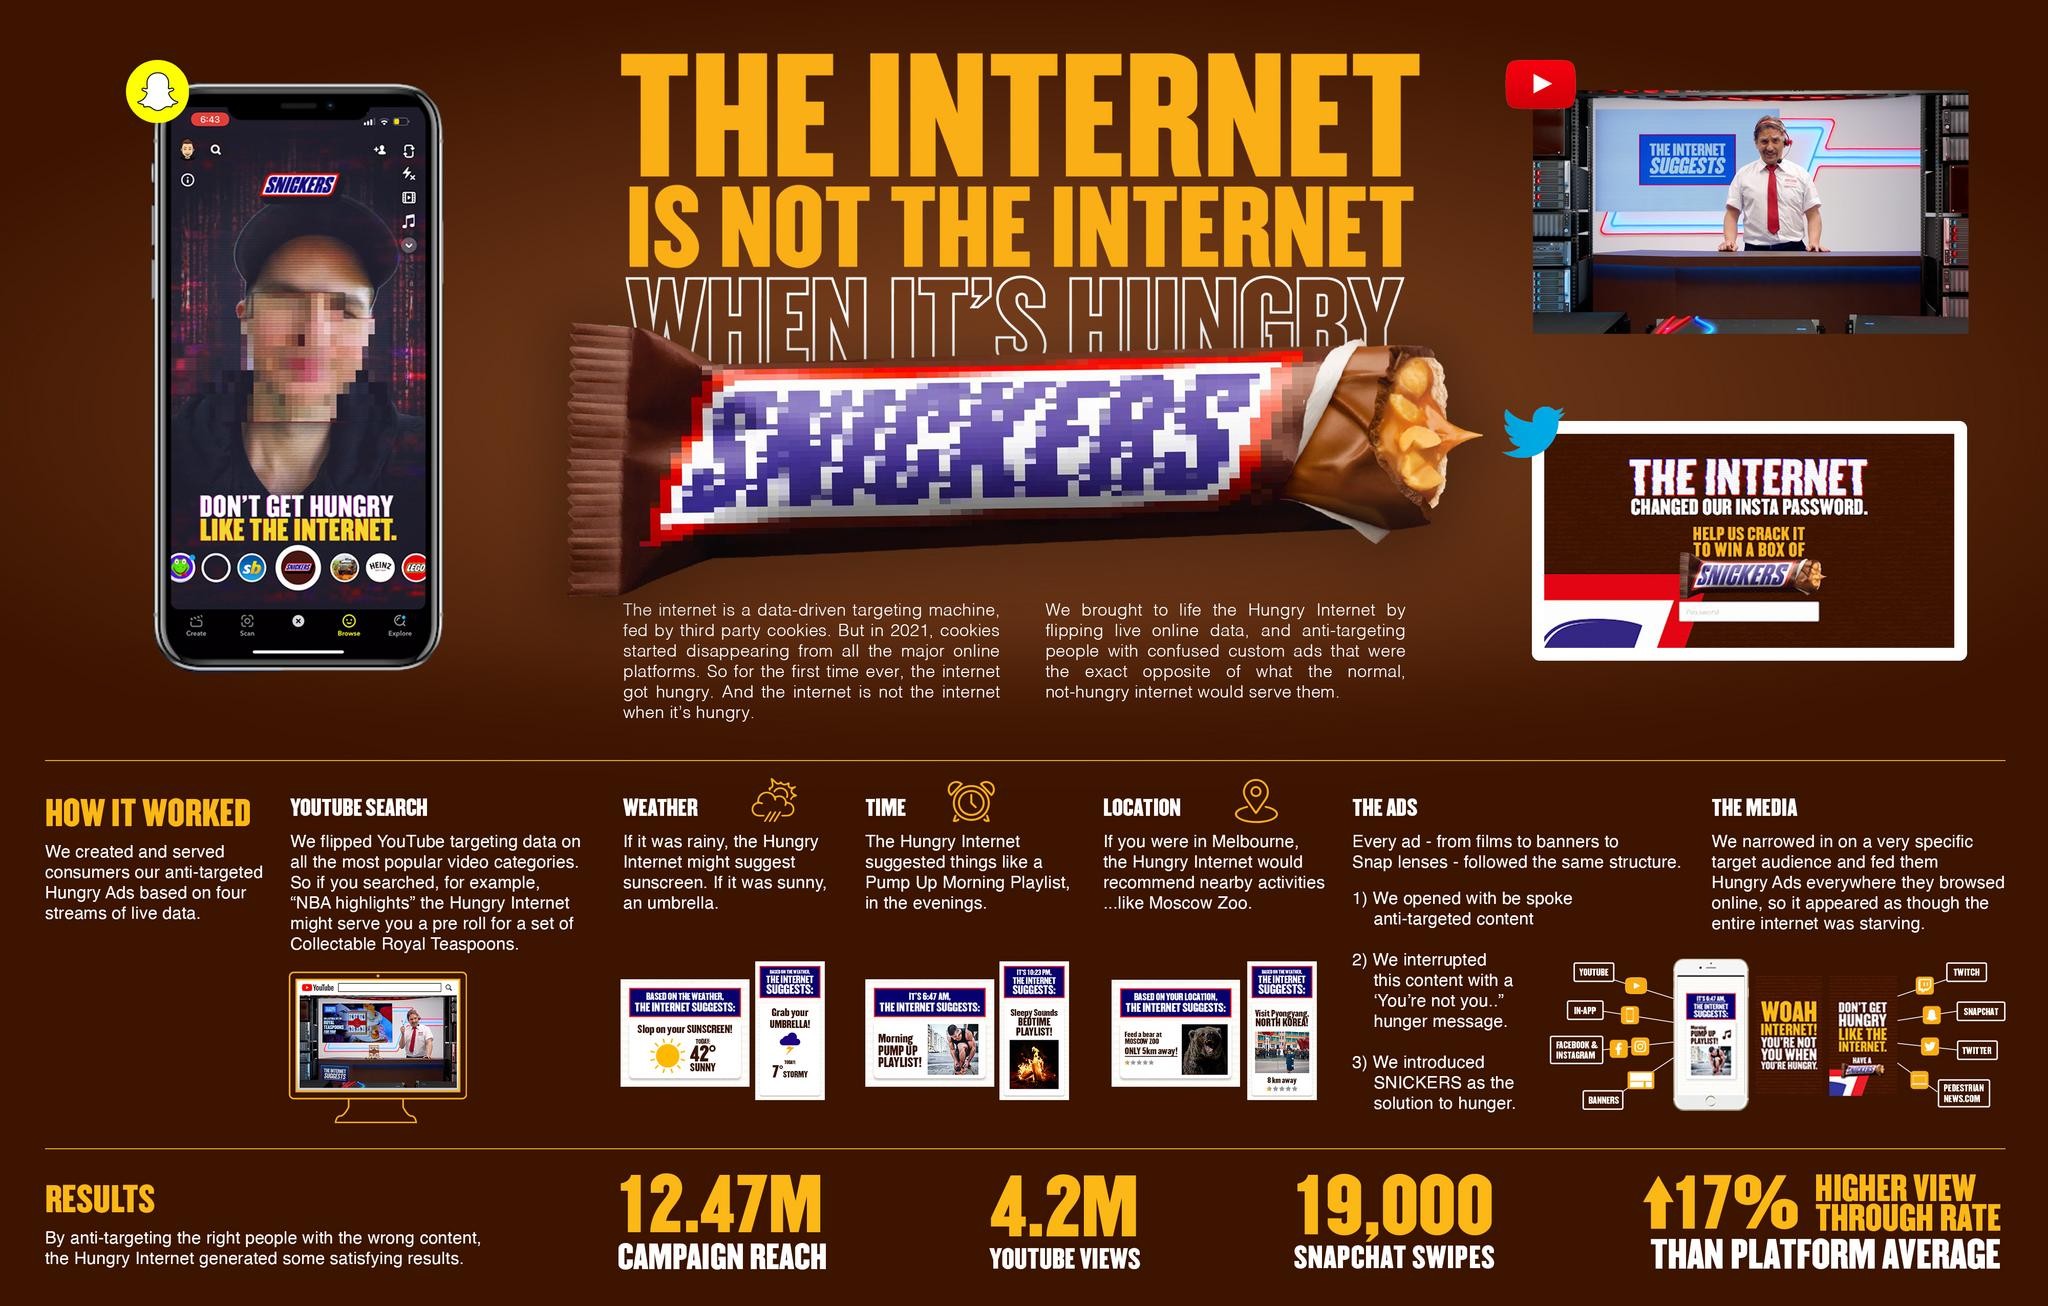 The Internet is not the Internet when it's Hungry